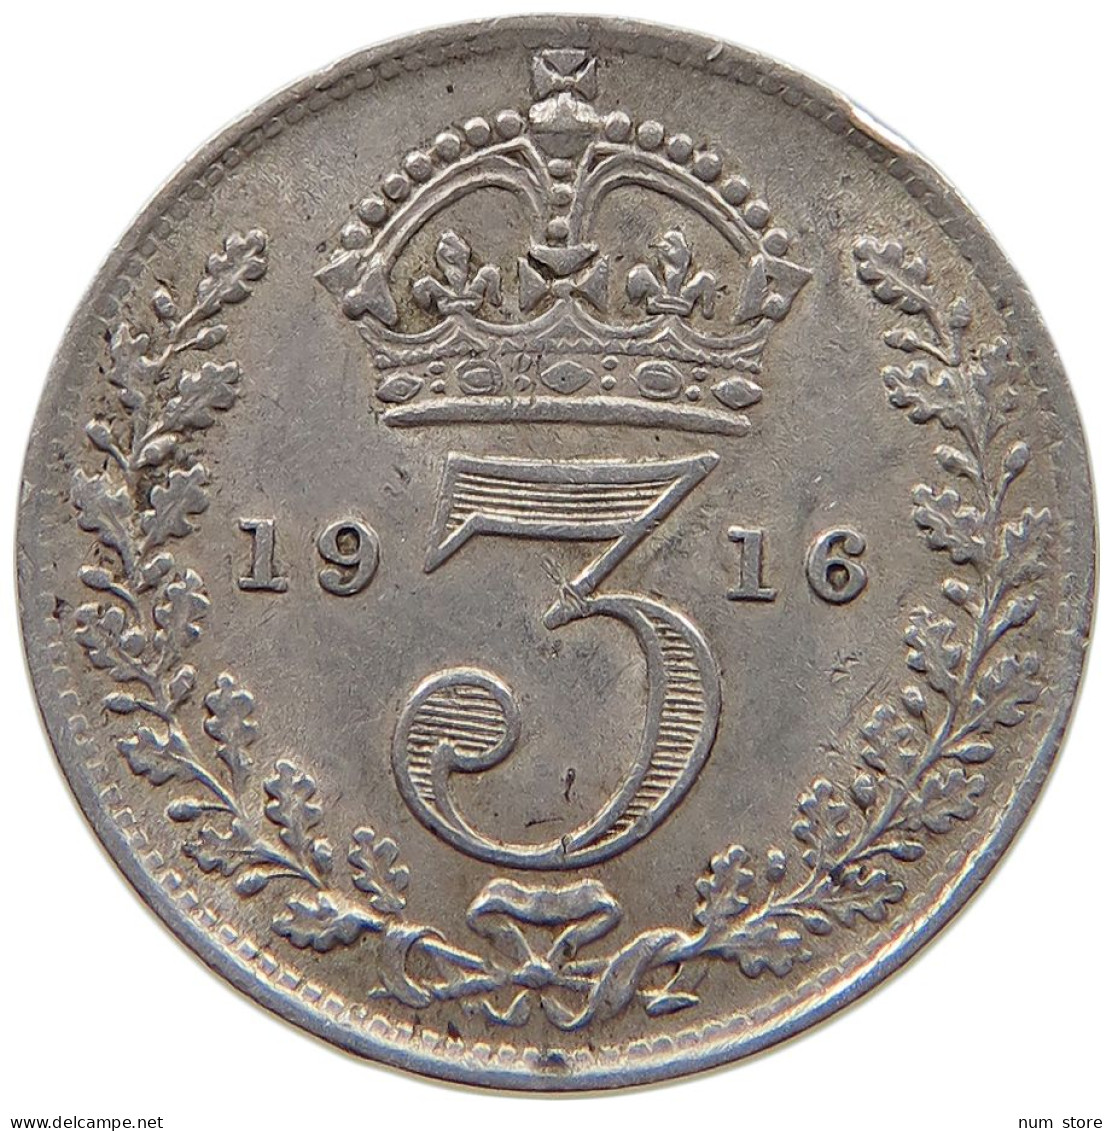 GREAT BRITAIN THREEPENCE 1916 George V. (1910-1936) #c019 0111 - F. 3 Pence